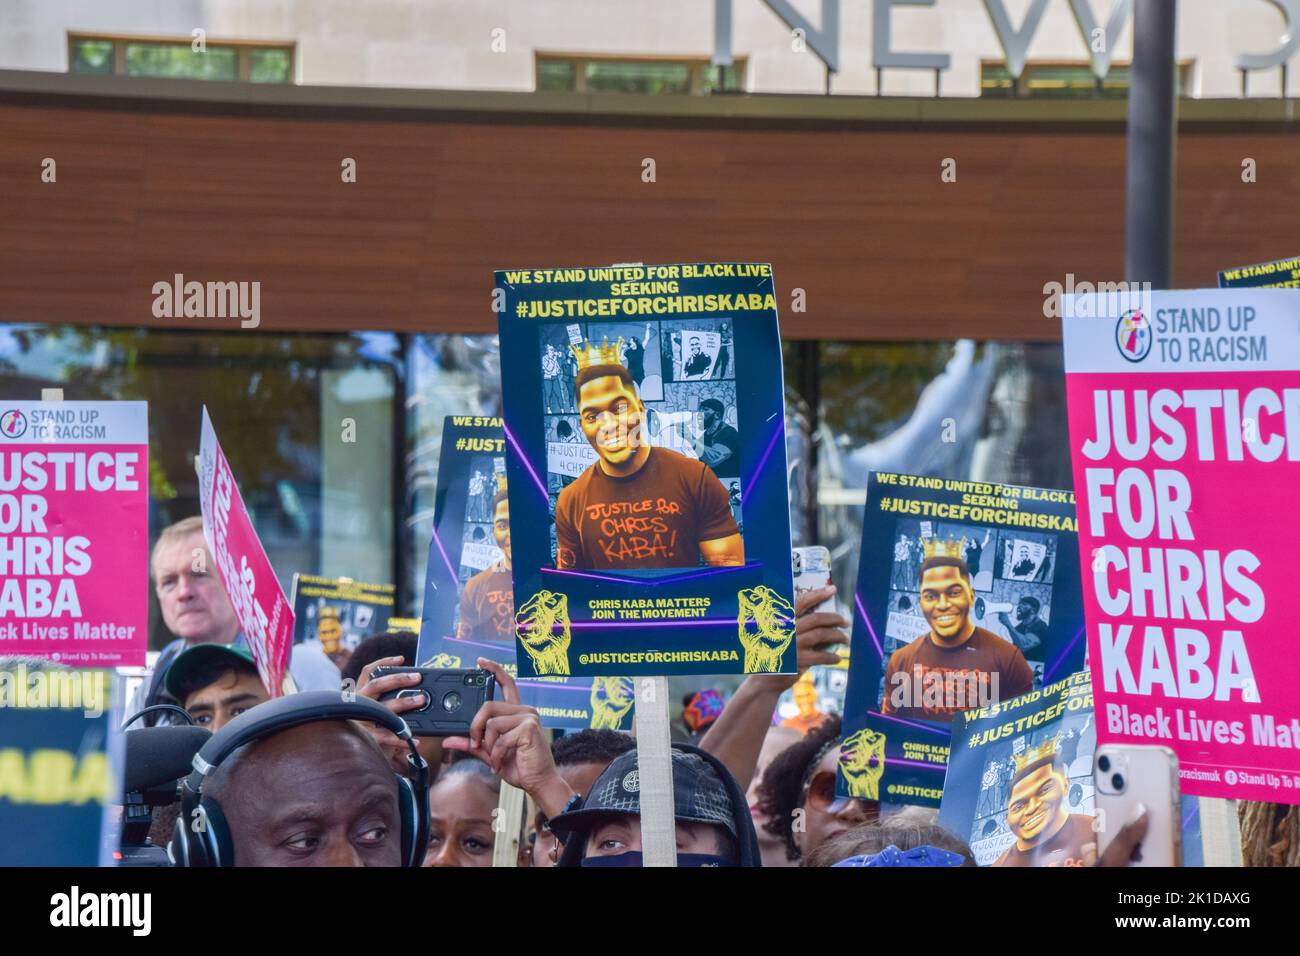 London, UK. 17th Sep, 2022. Protesters gathered outside New Scotland Yard demanding justice for Chris Kaba, who was shot and killed by police despite being unarmed. Stock Photo